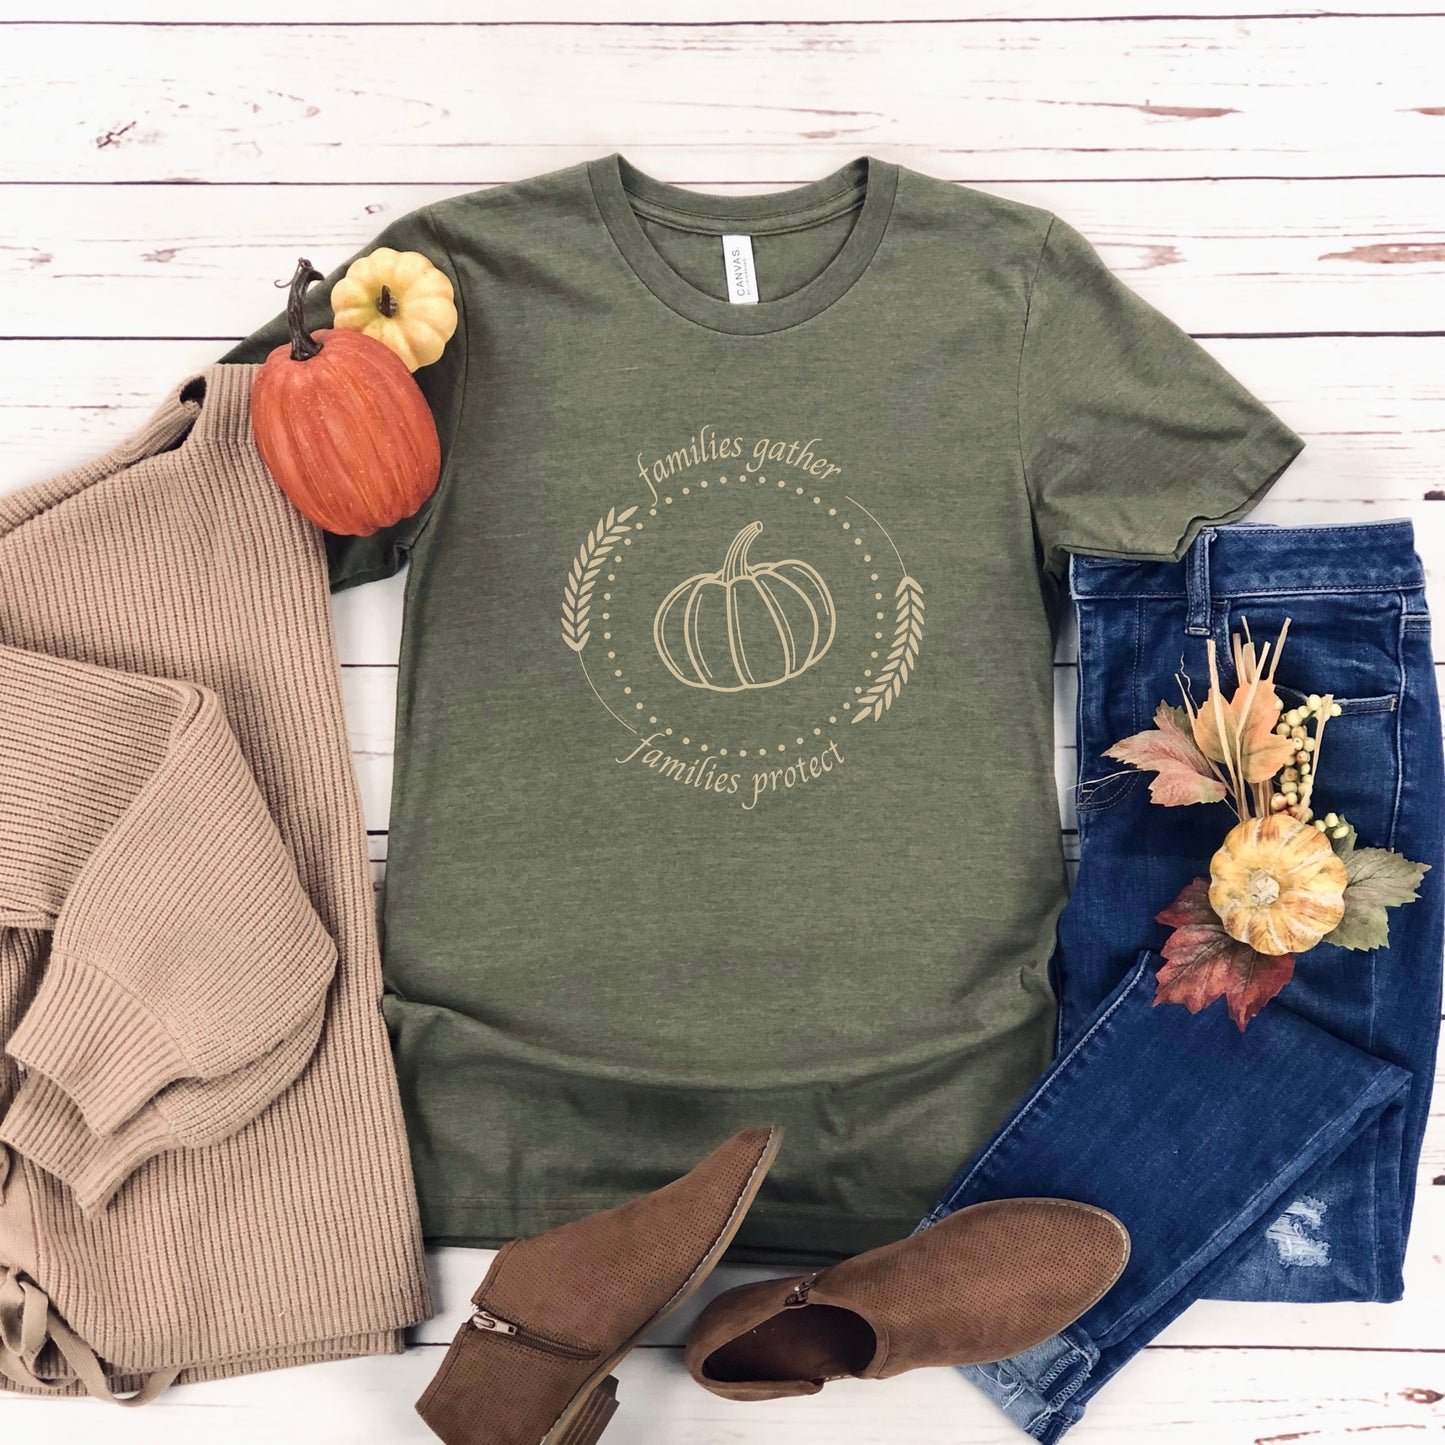 Adorned with a heartwarming autumn-fall harvest pumpkin graphic and the inspiring message Families Gather, Families Protect, this White T-shirt stands as a testament to the unwavering support and protection families should offer to survivors.